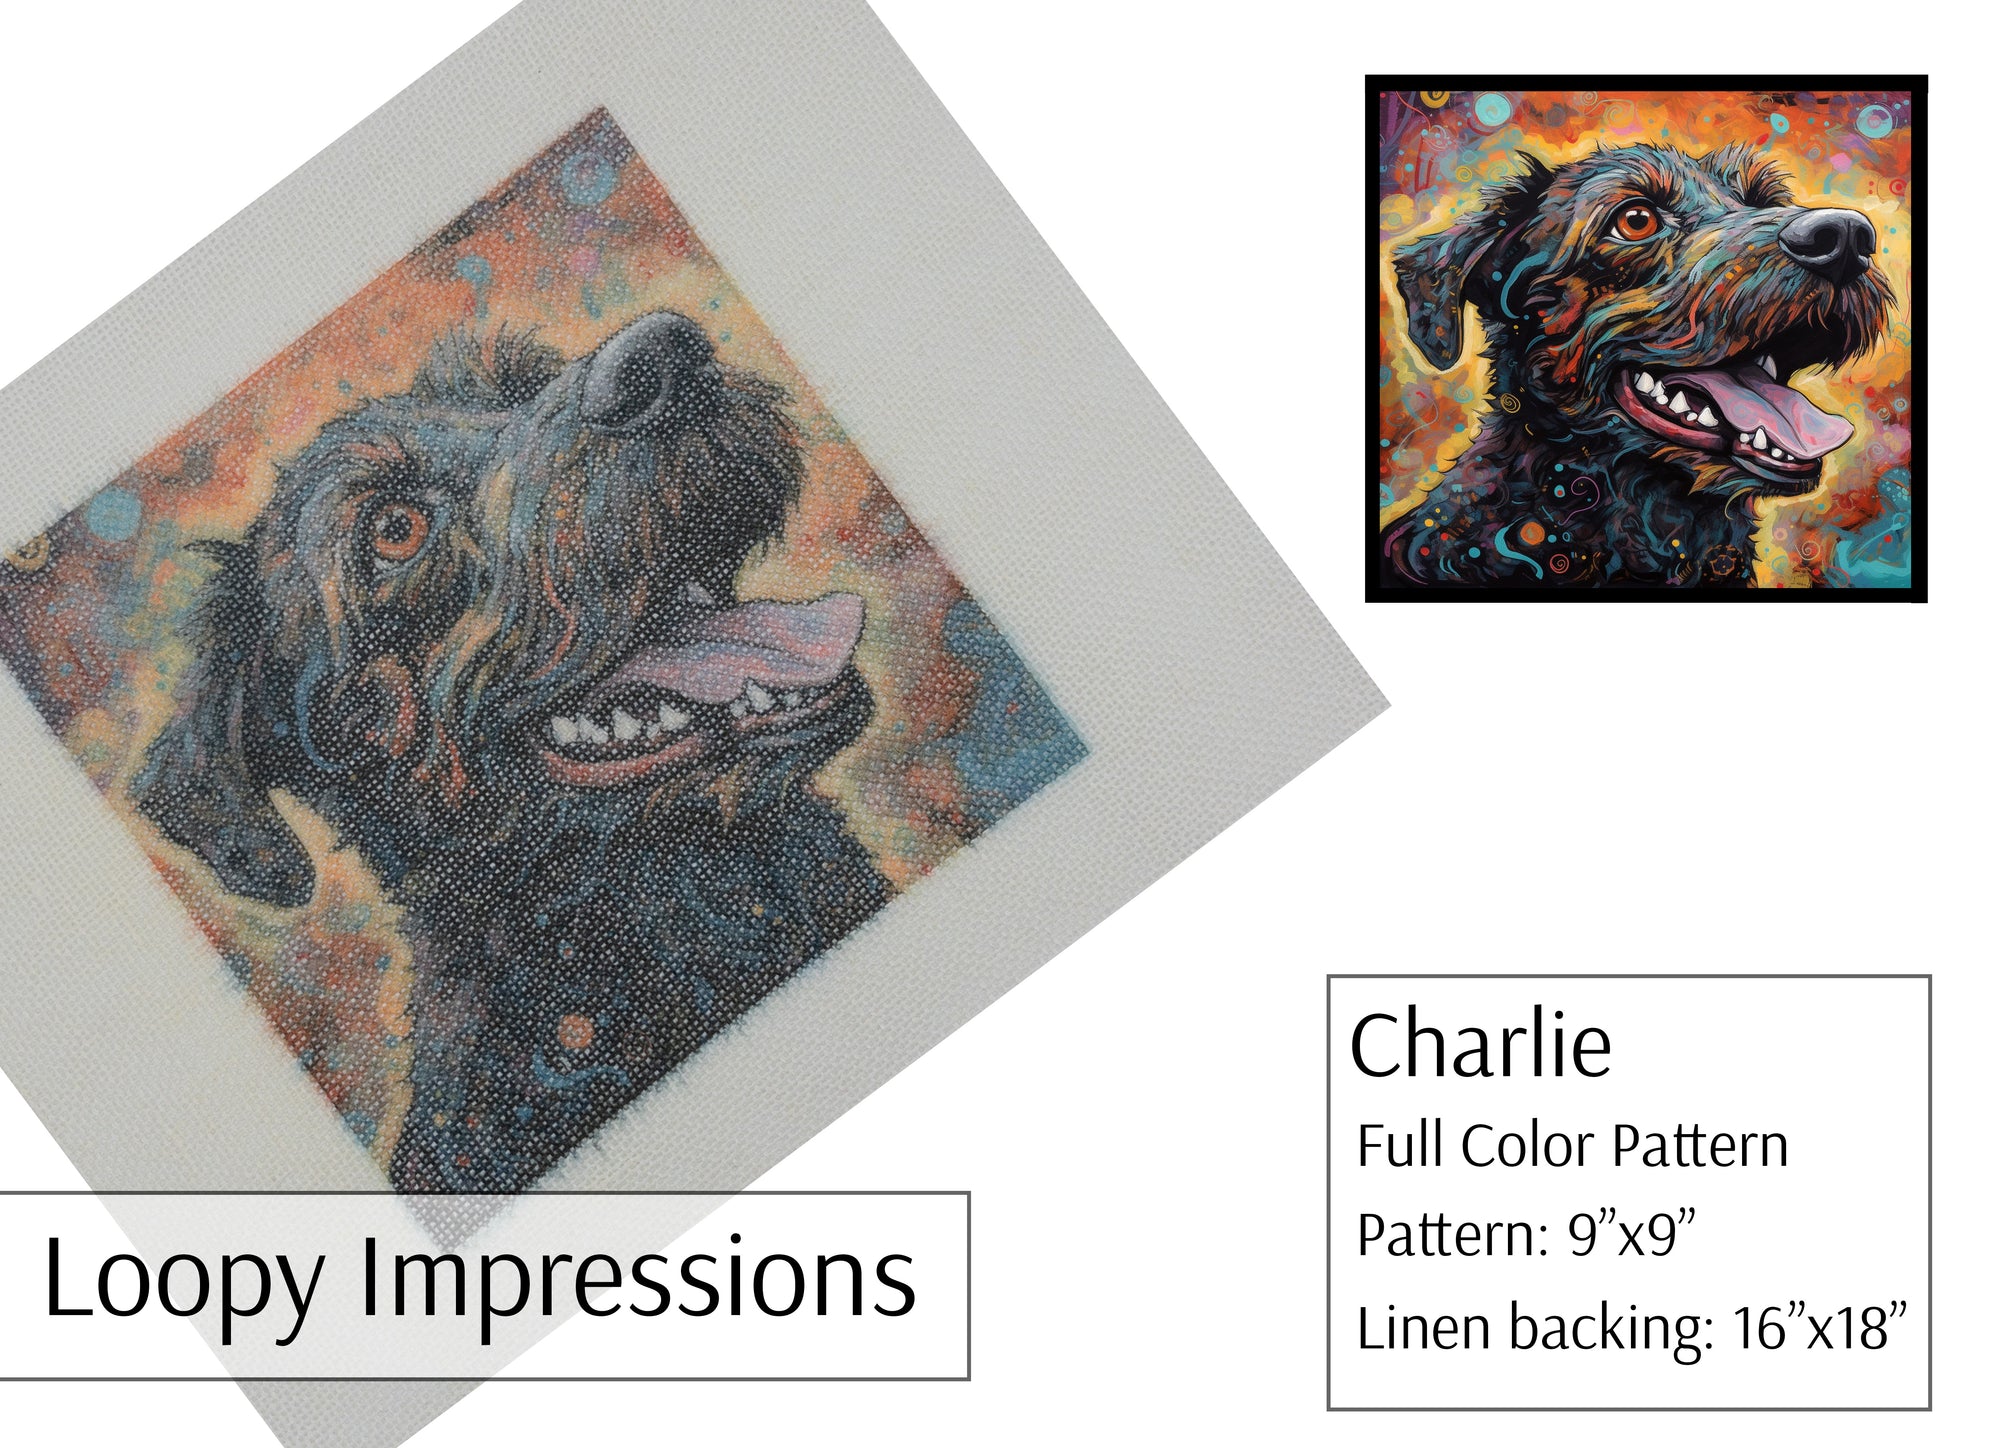 Loopy Impressions Full Color Pattern - Charlie